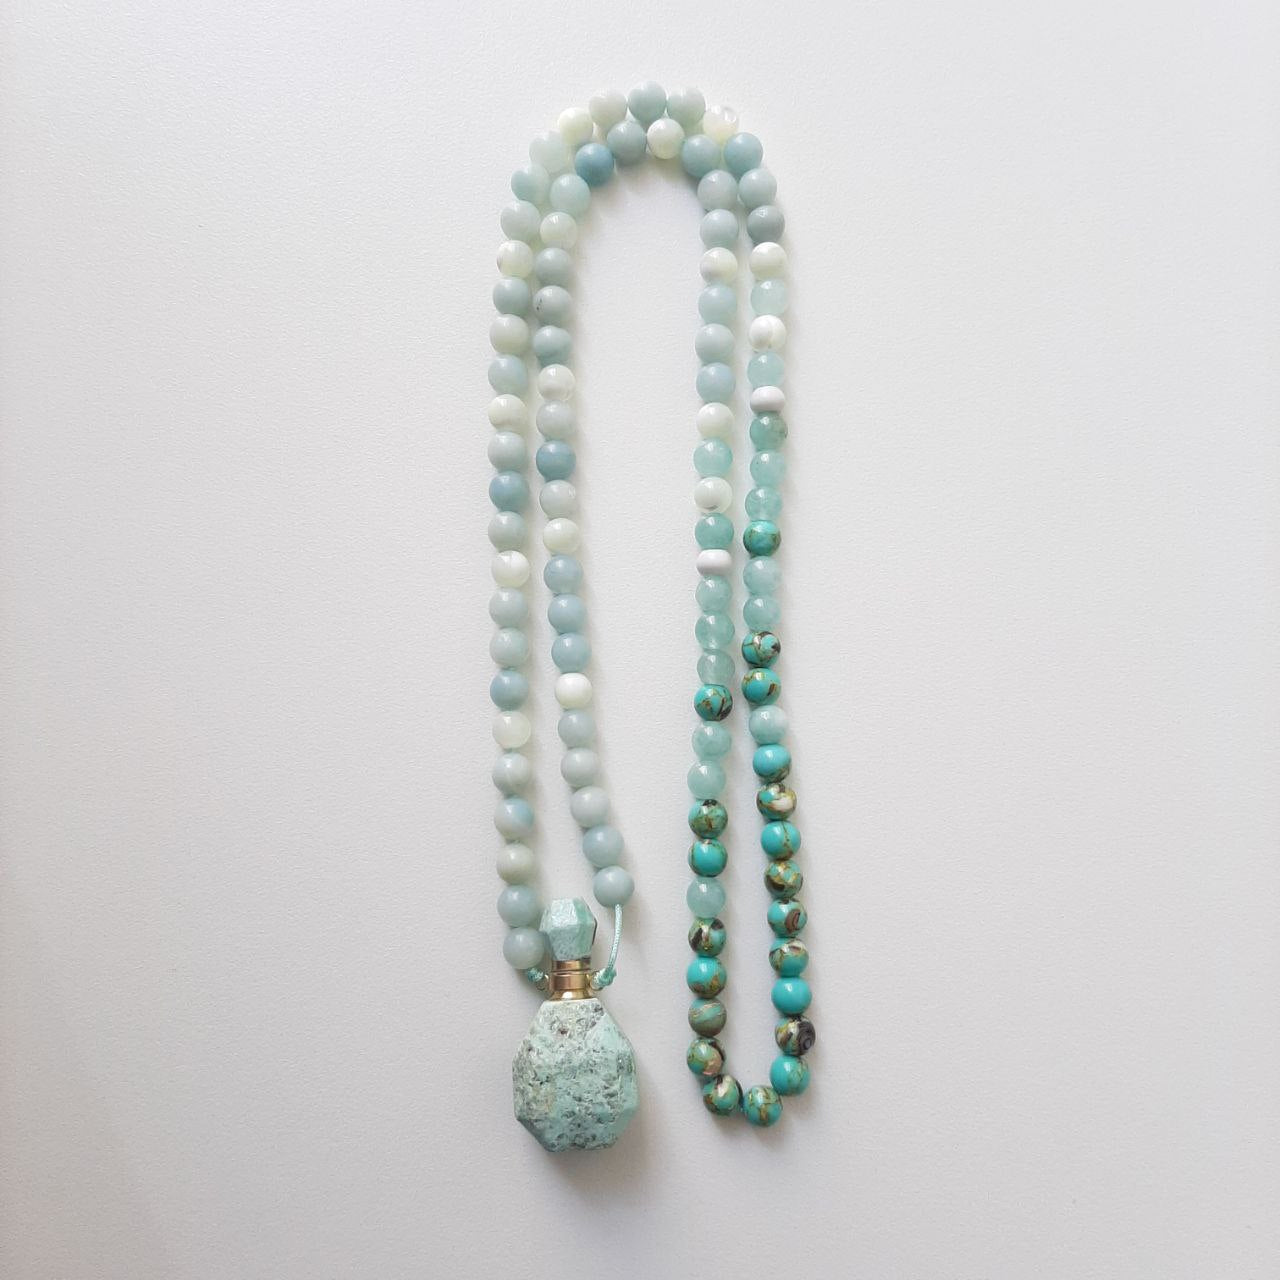 Amazonite perfume vial with amazonite and sea sediment beads. These little vials open up and come with a dropper so that you can add your favourite scent.  Packaged in a luxurious pouch and a gift box.  99 beads